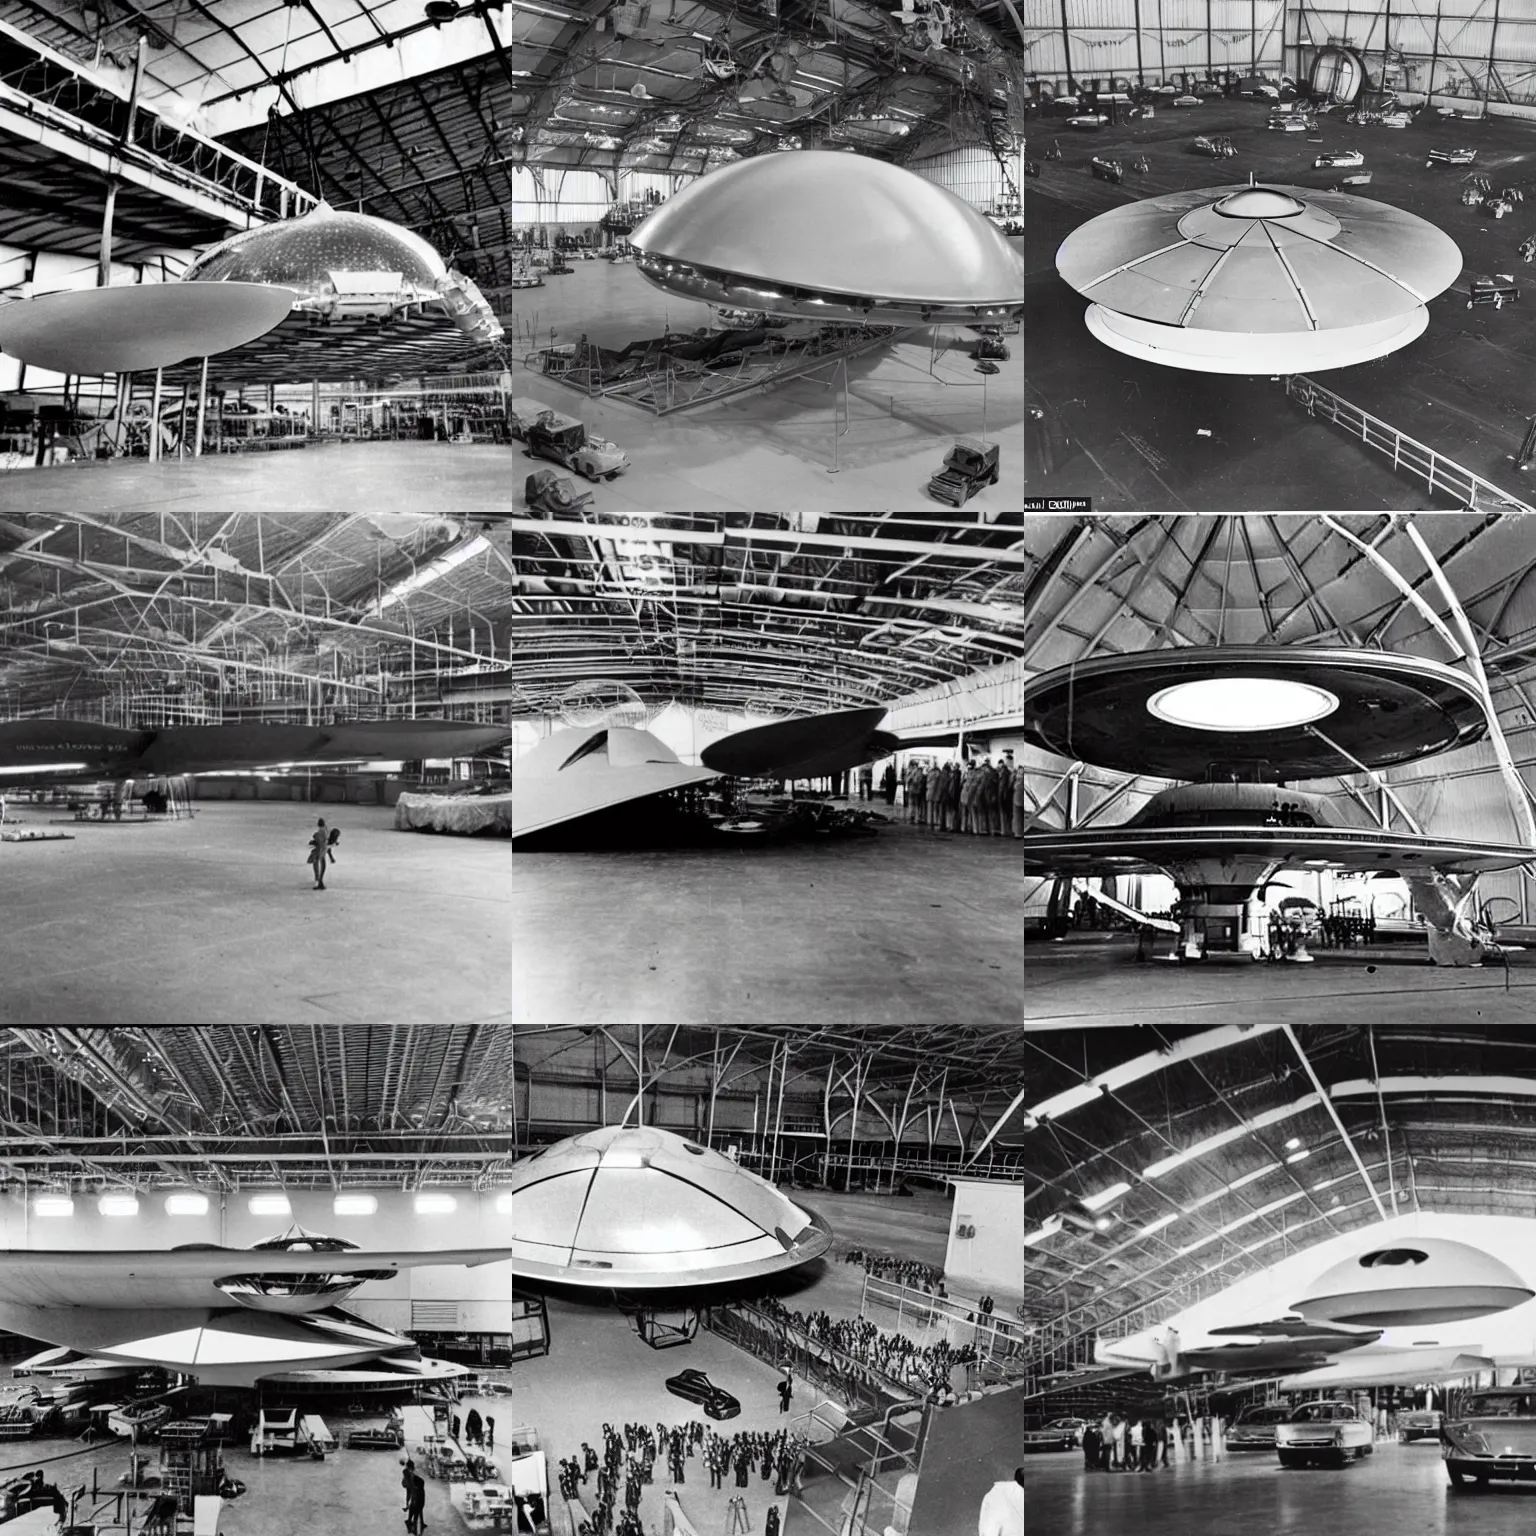 Prompt: 1960s photographic evidence of a small alien UFO spaceship being assembled by US Air Force in a hangar